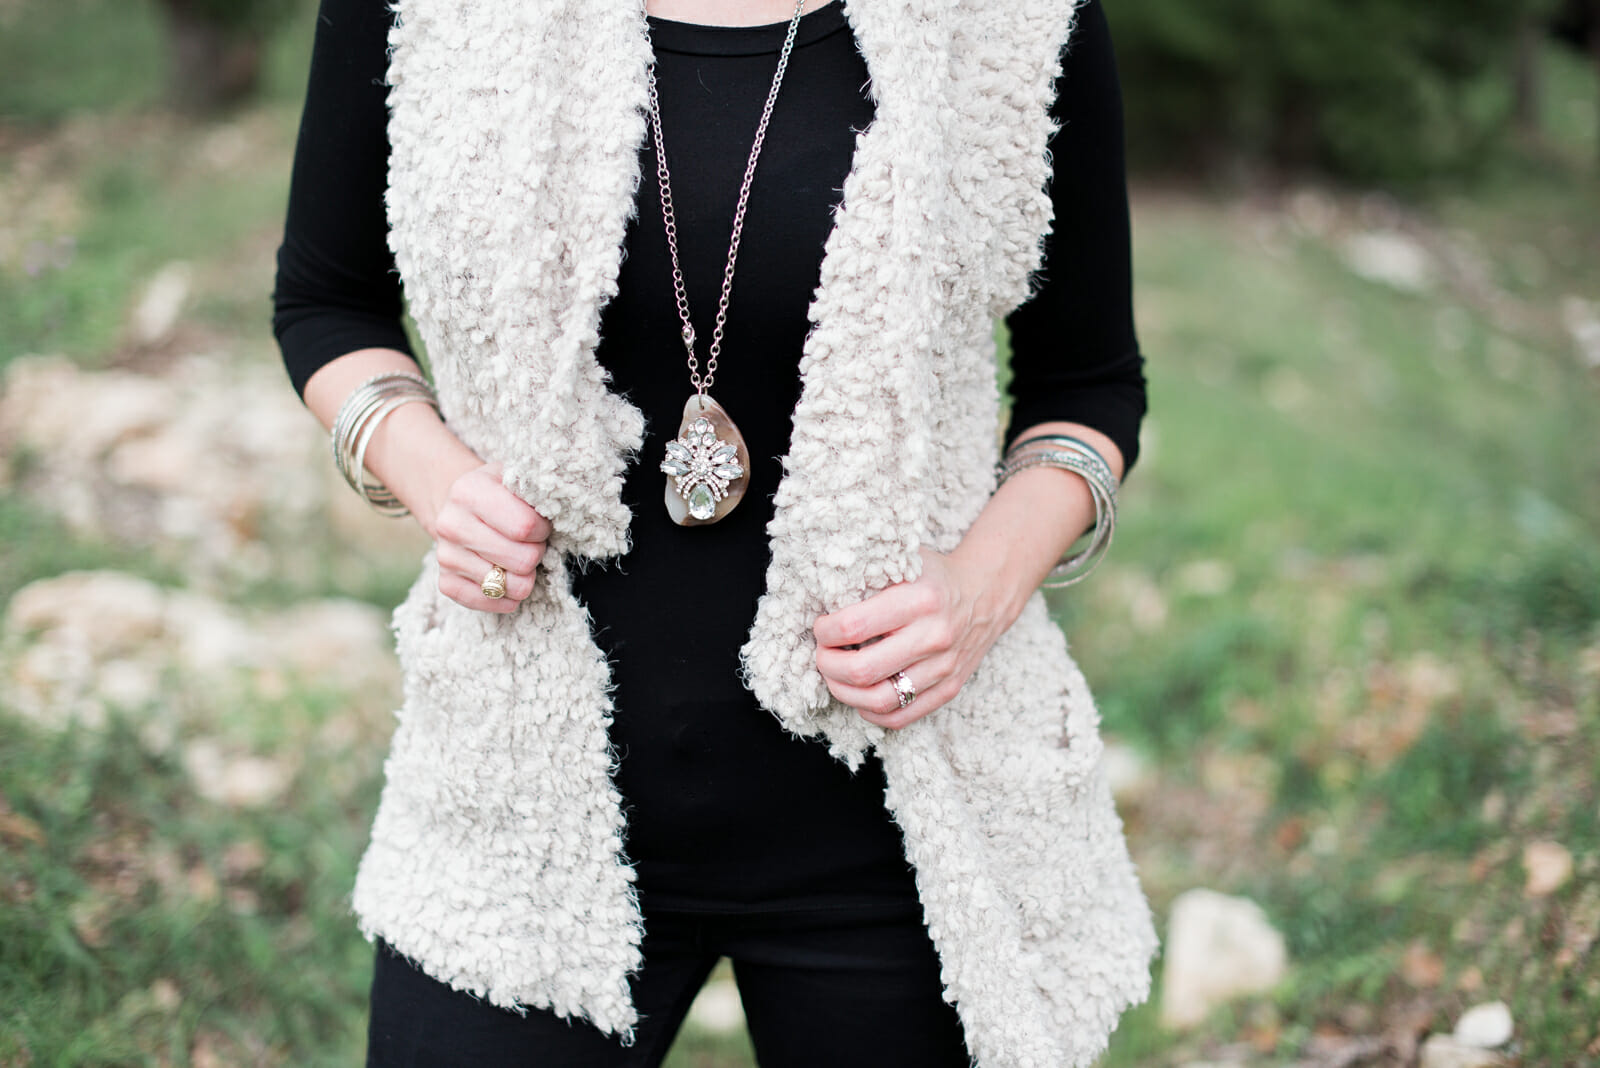 Faux fur vests are great style choices for fall and winter